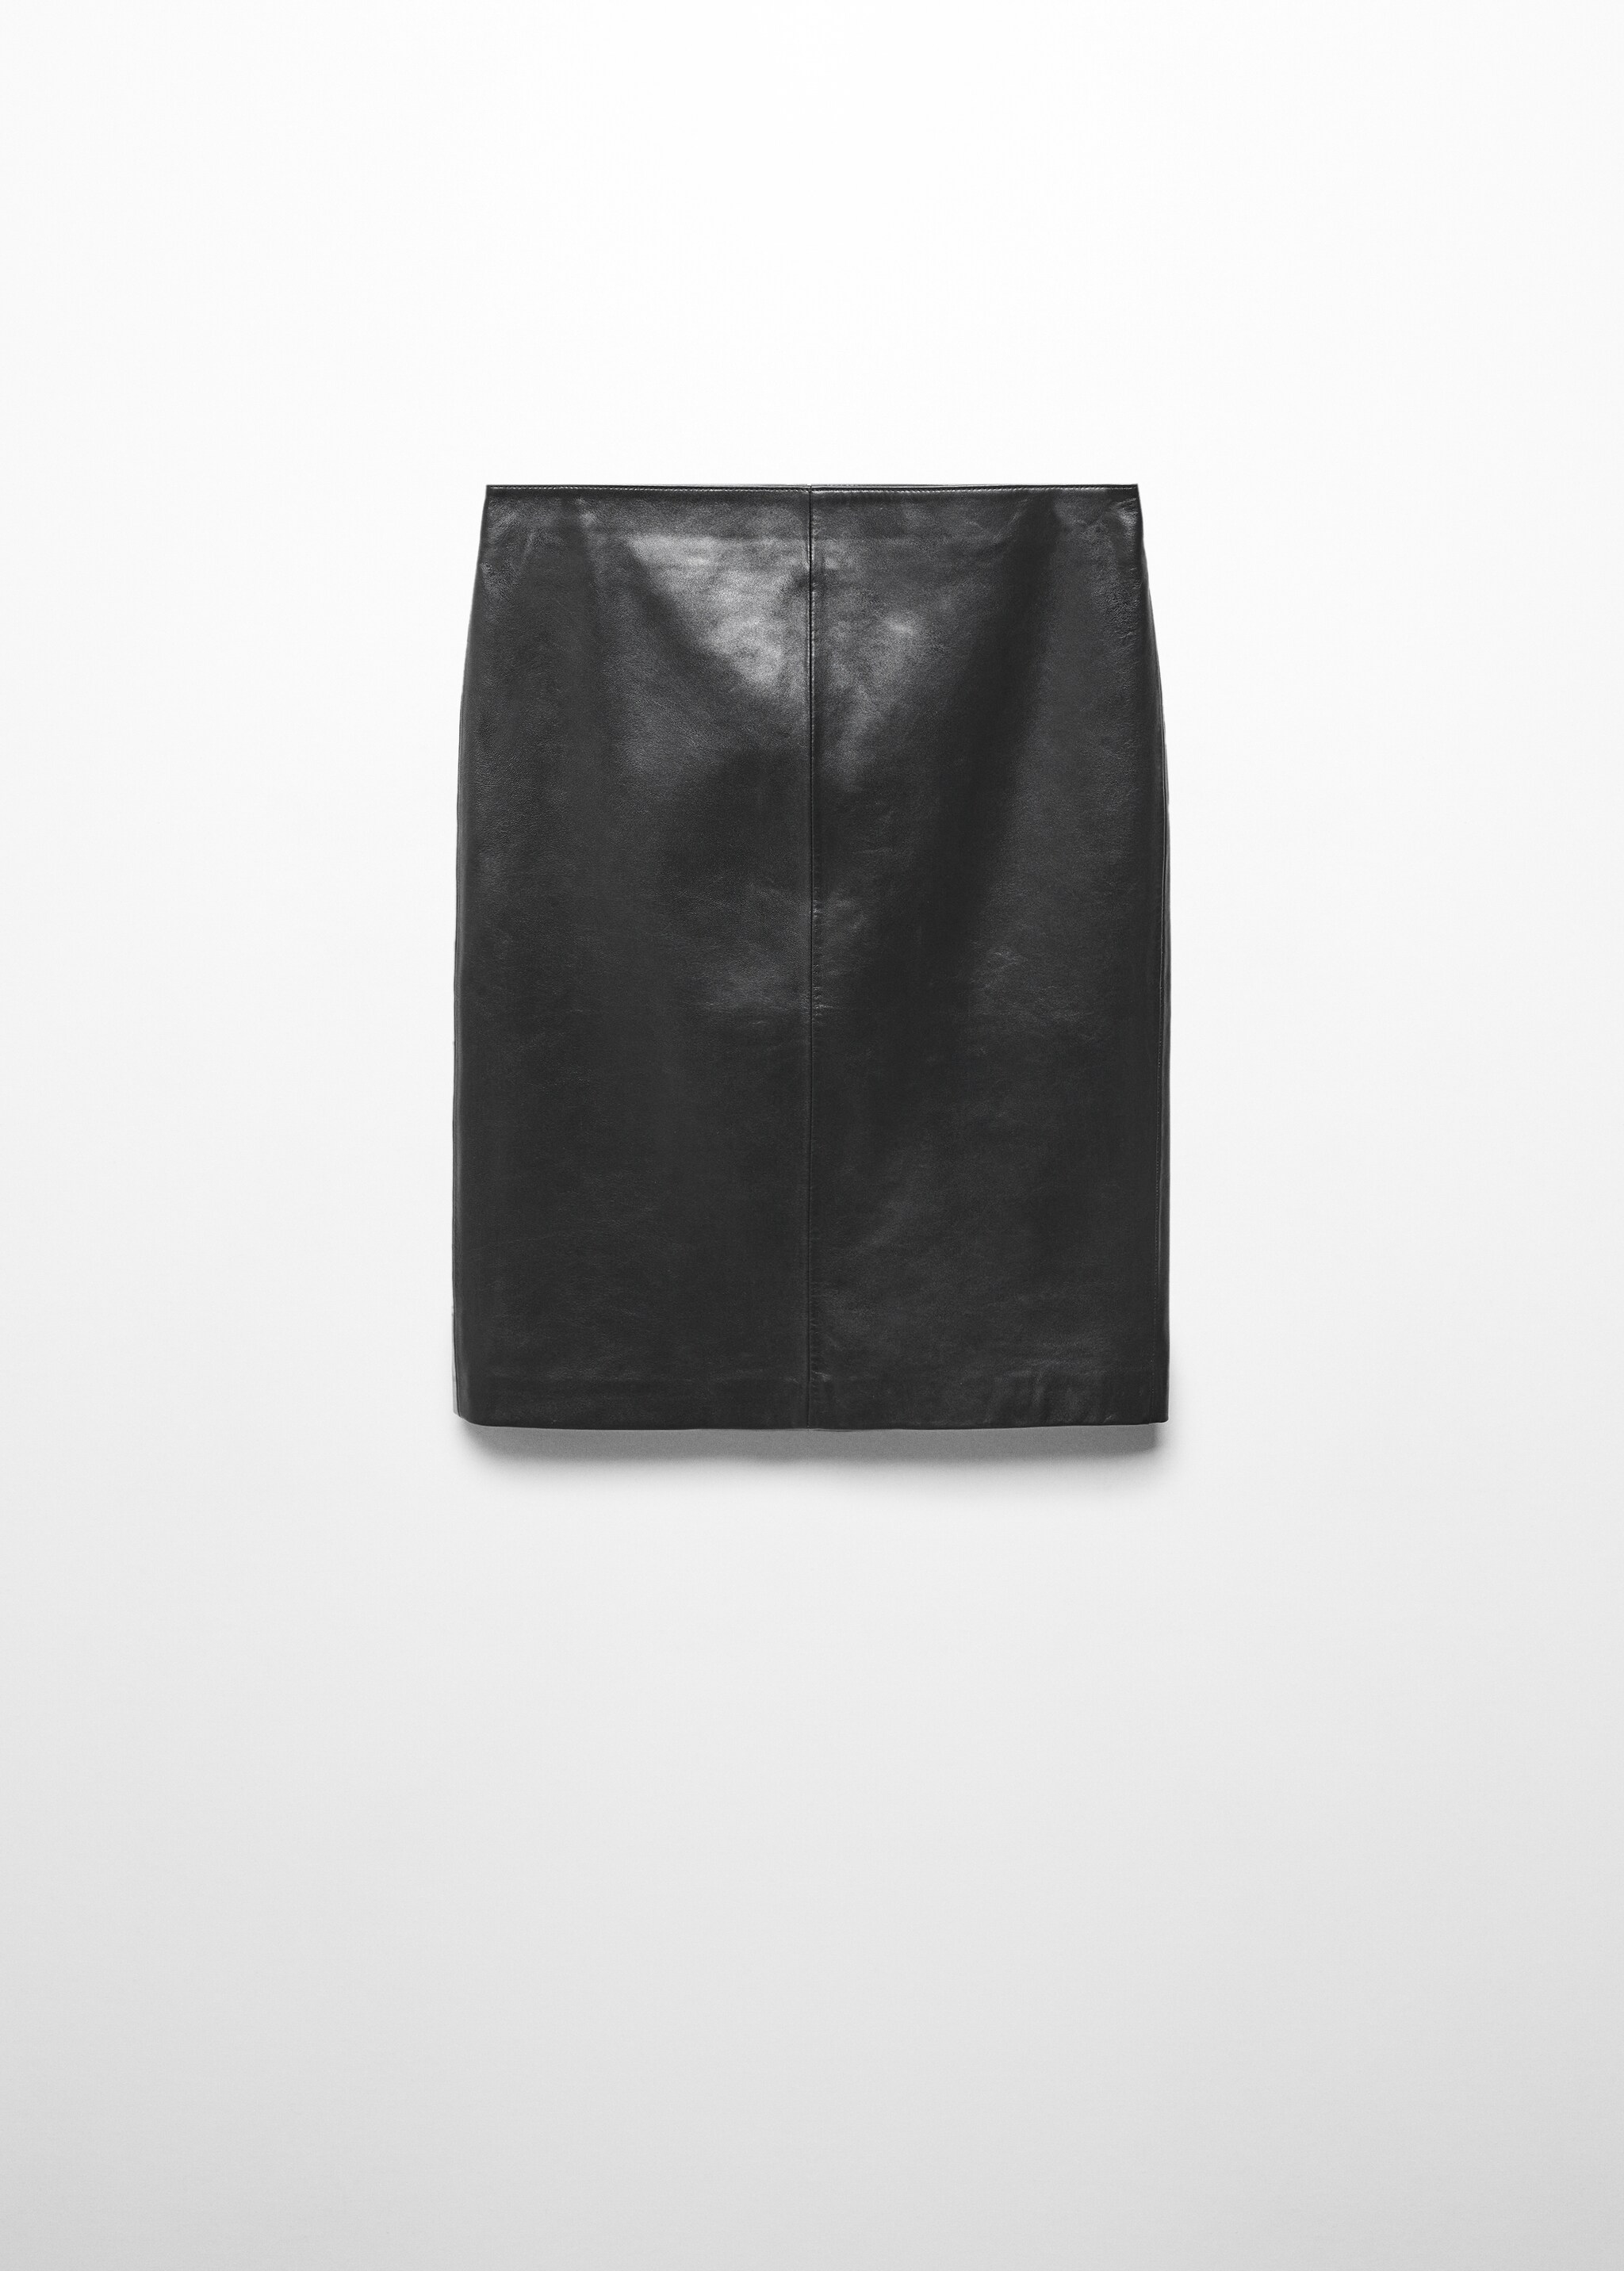 100% leather midi skirt - Article without model